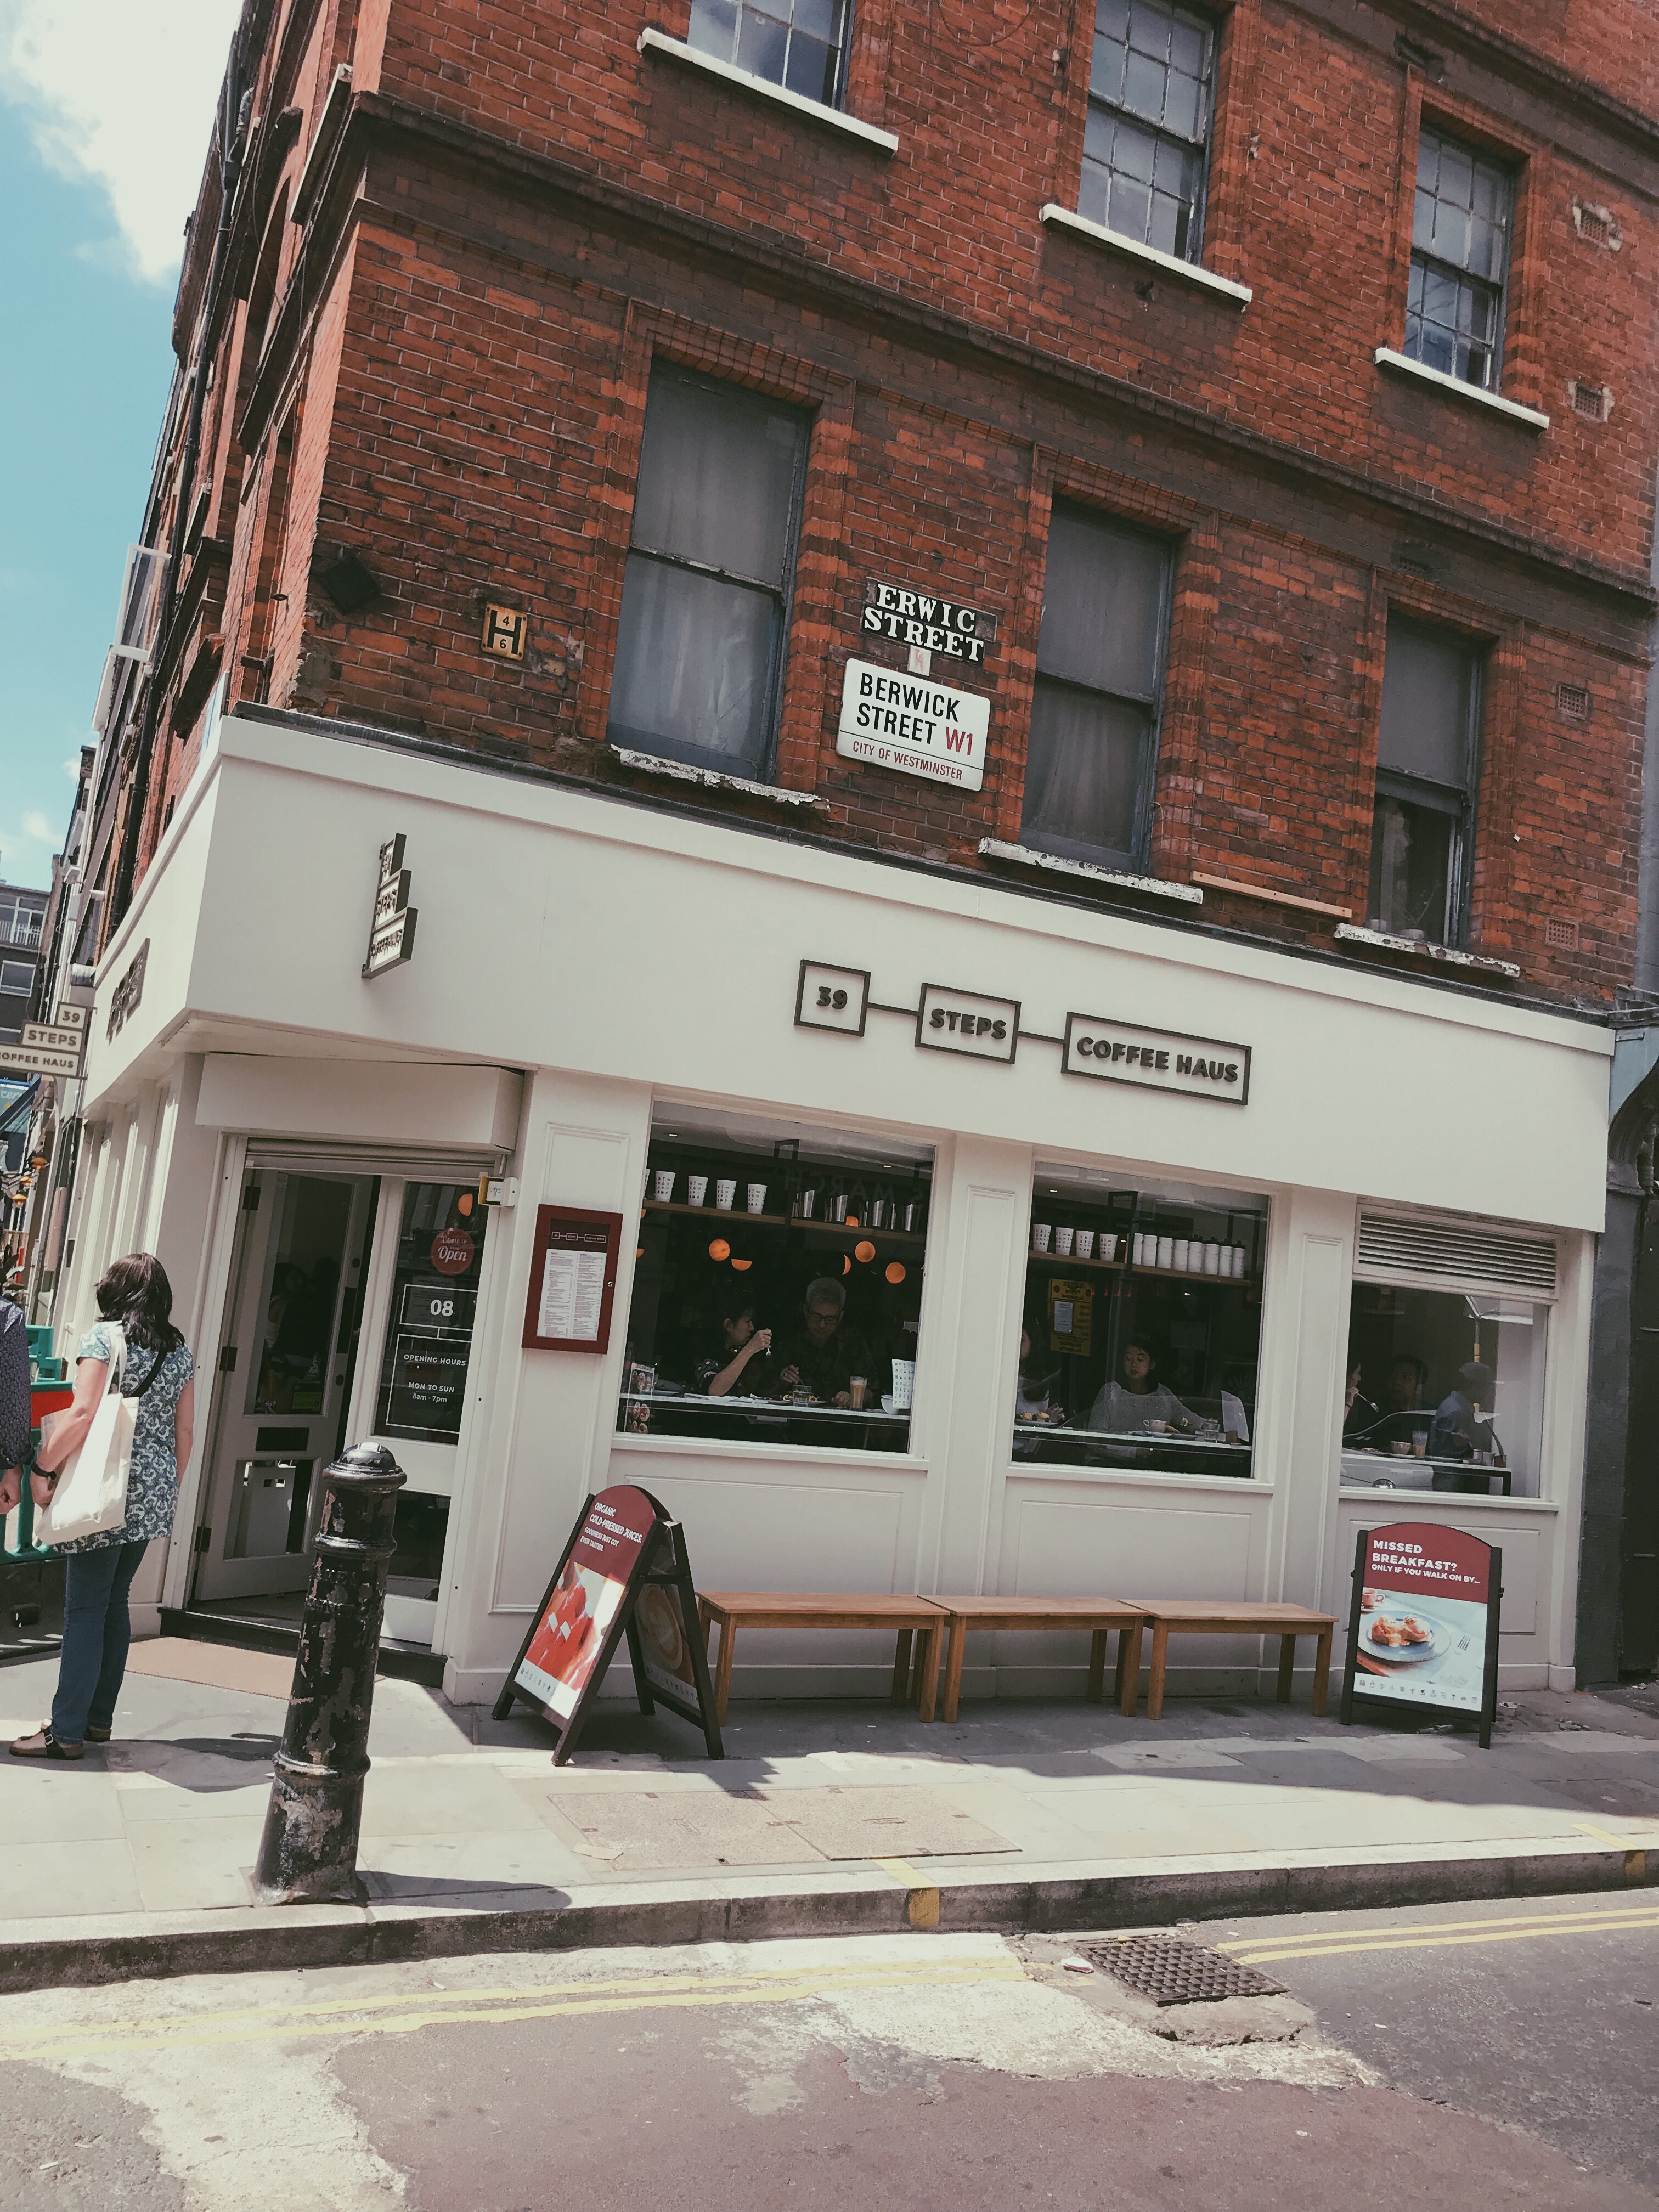 39 Steps Coffee Haus Review • twobrits